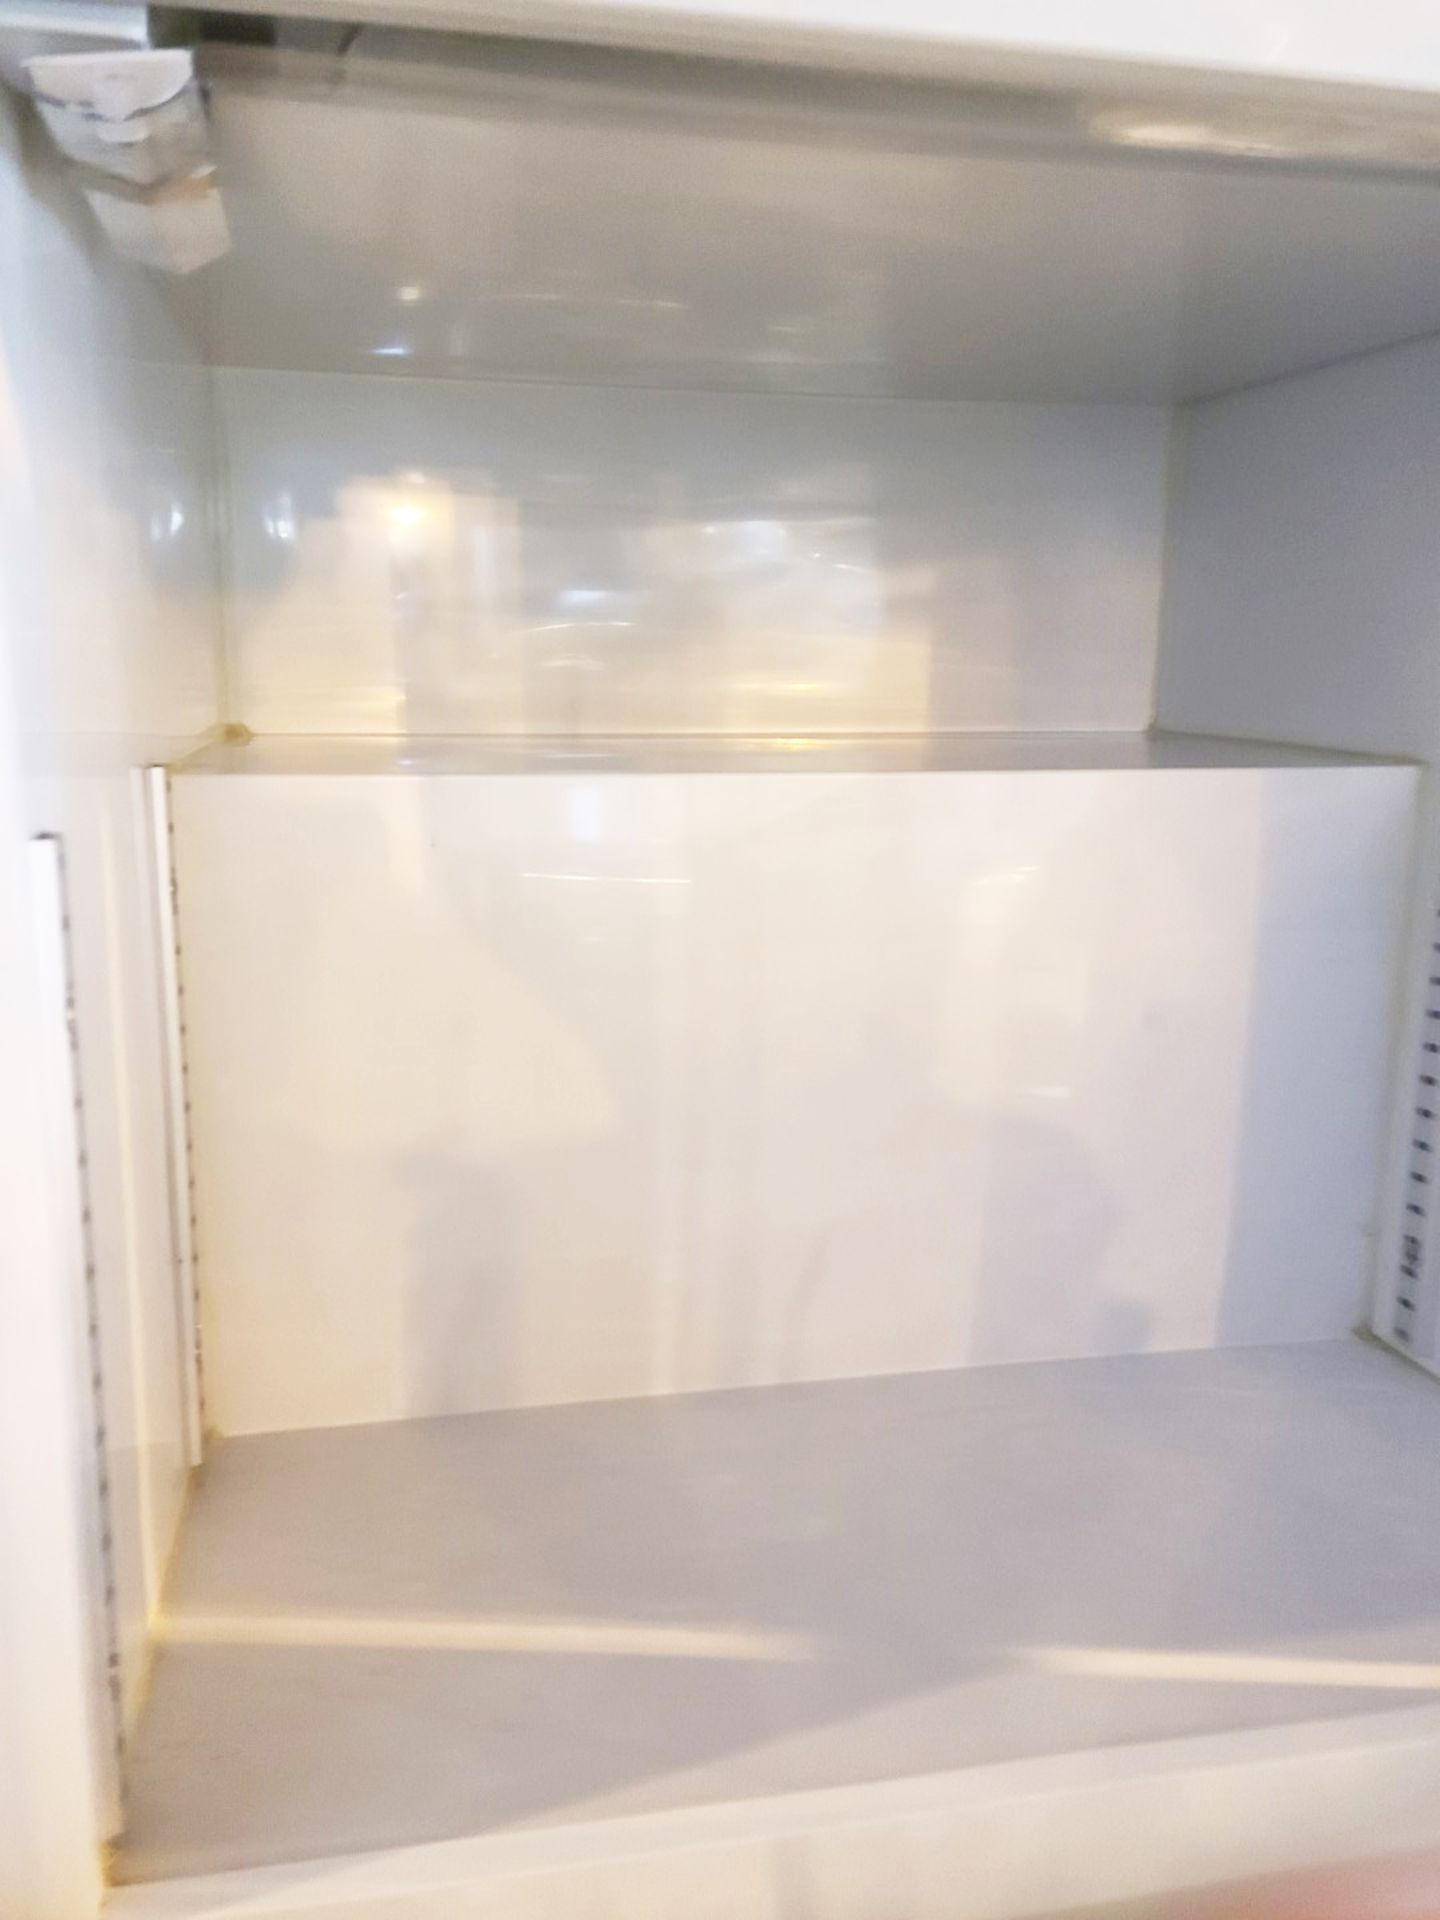 1 x TELFORD White Counter Top Fridge With Hinged Door and Adjustable Feet 60cm x 50cm - Image 7 of 7